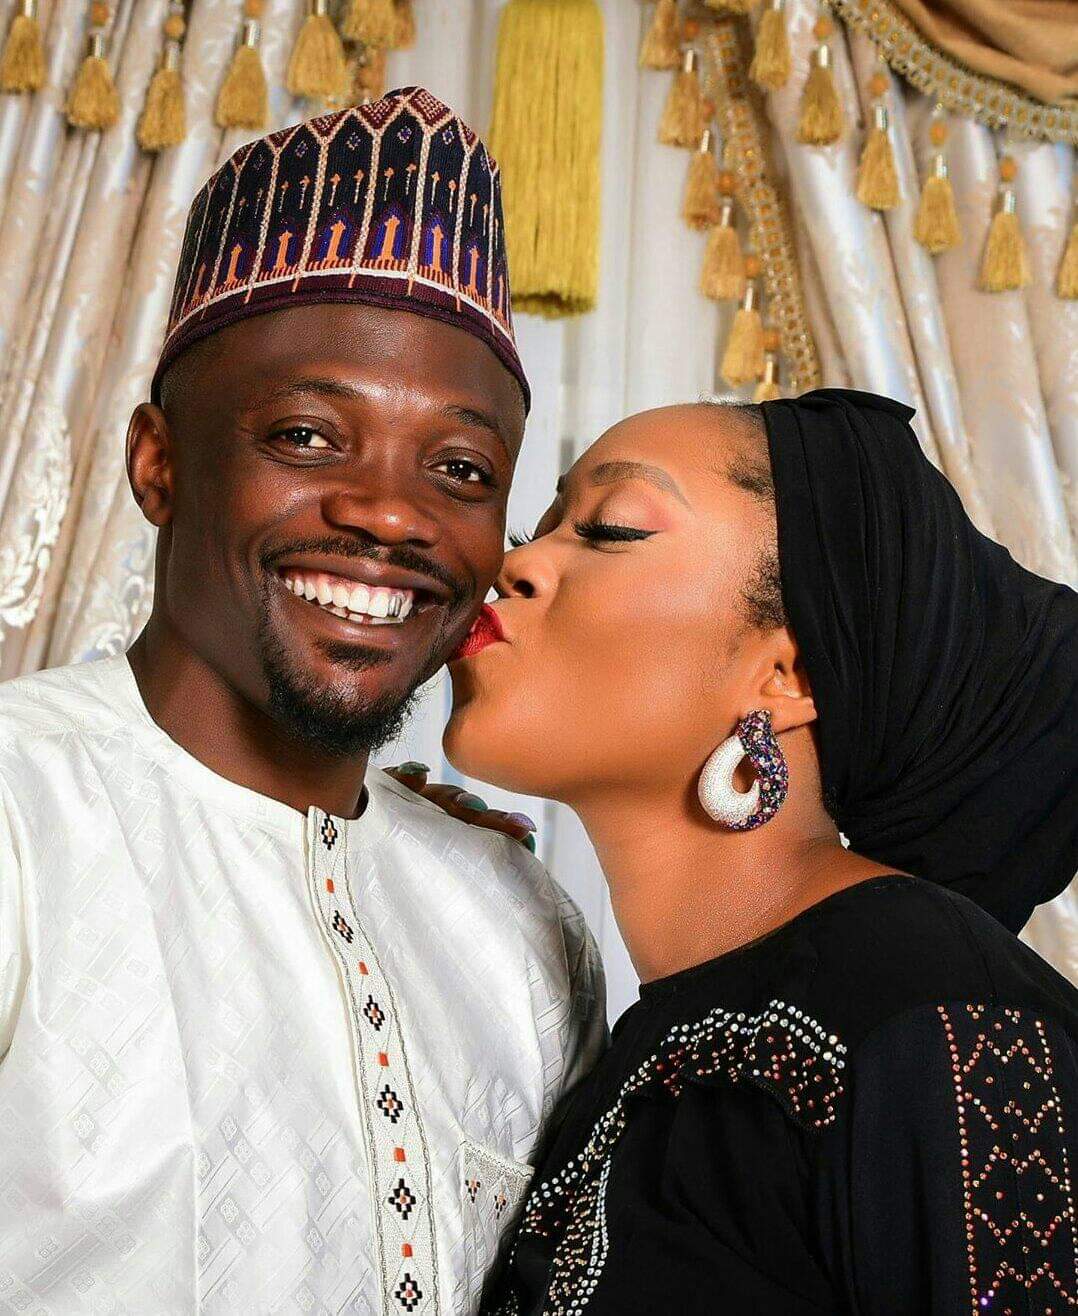 Musa's controversial photo of him kissing his wife